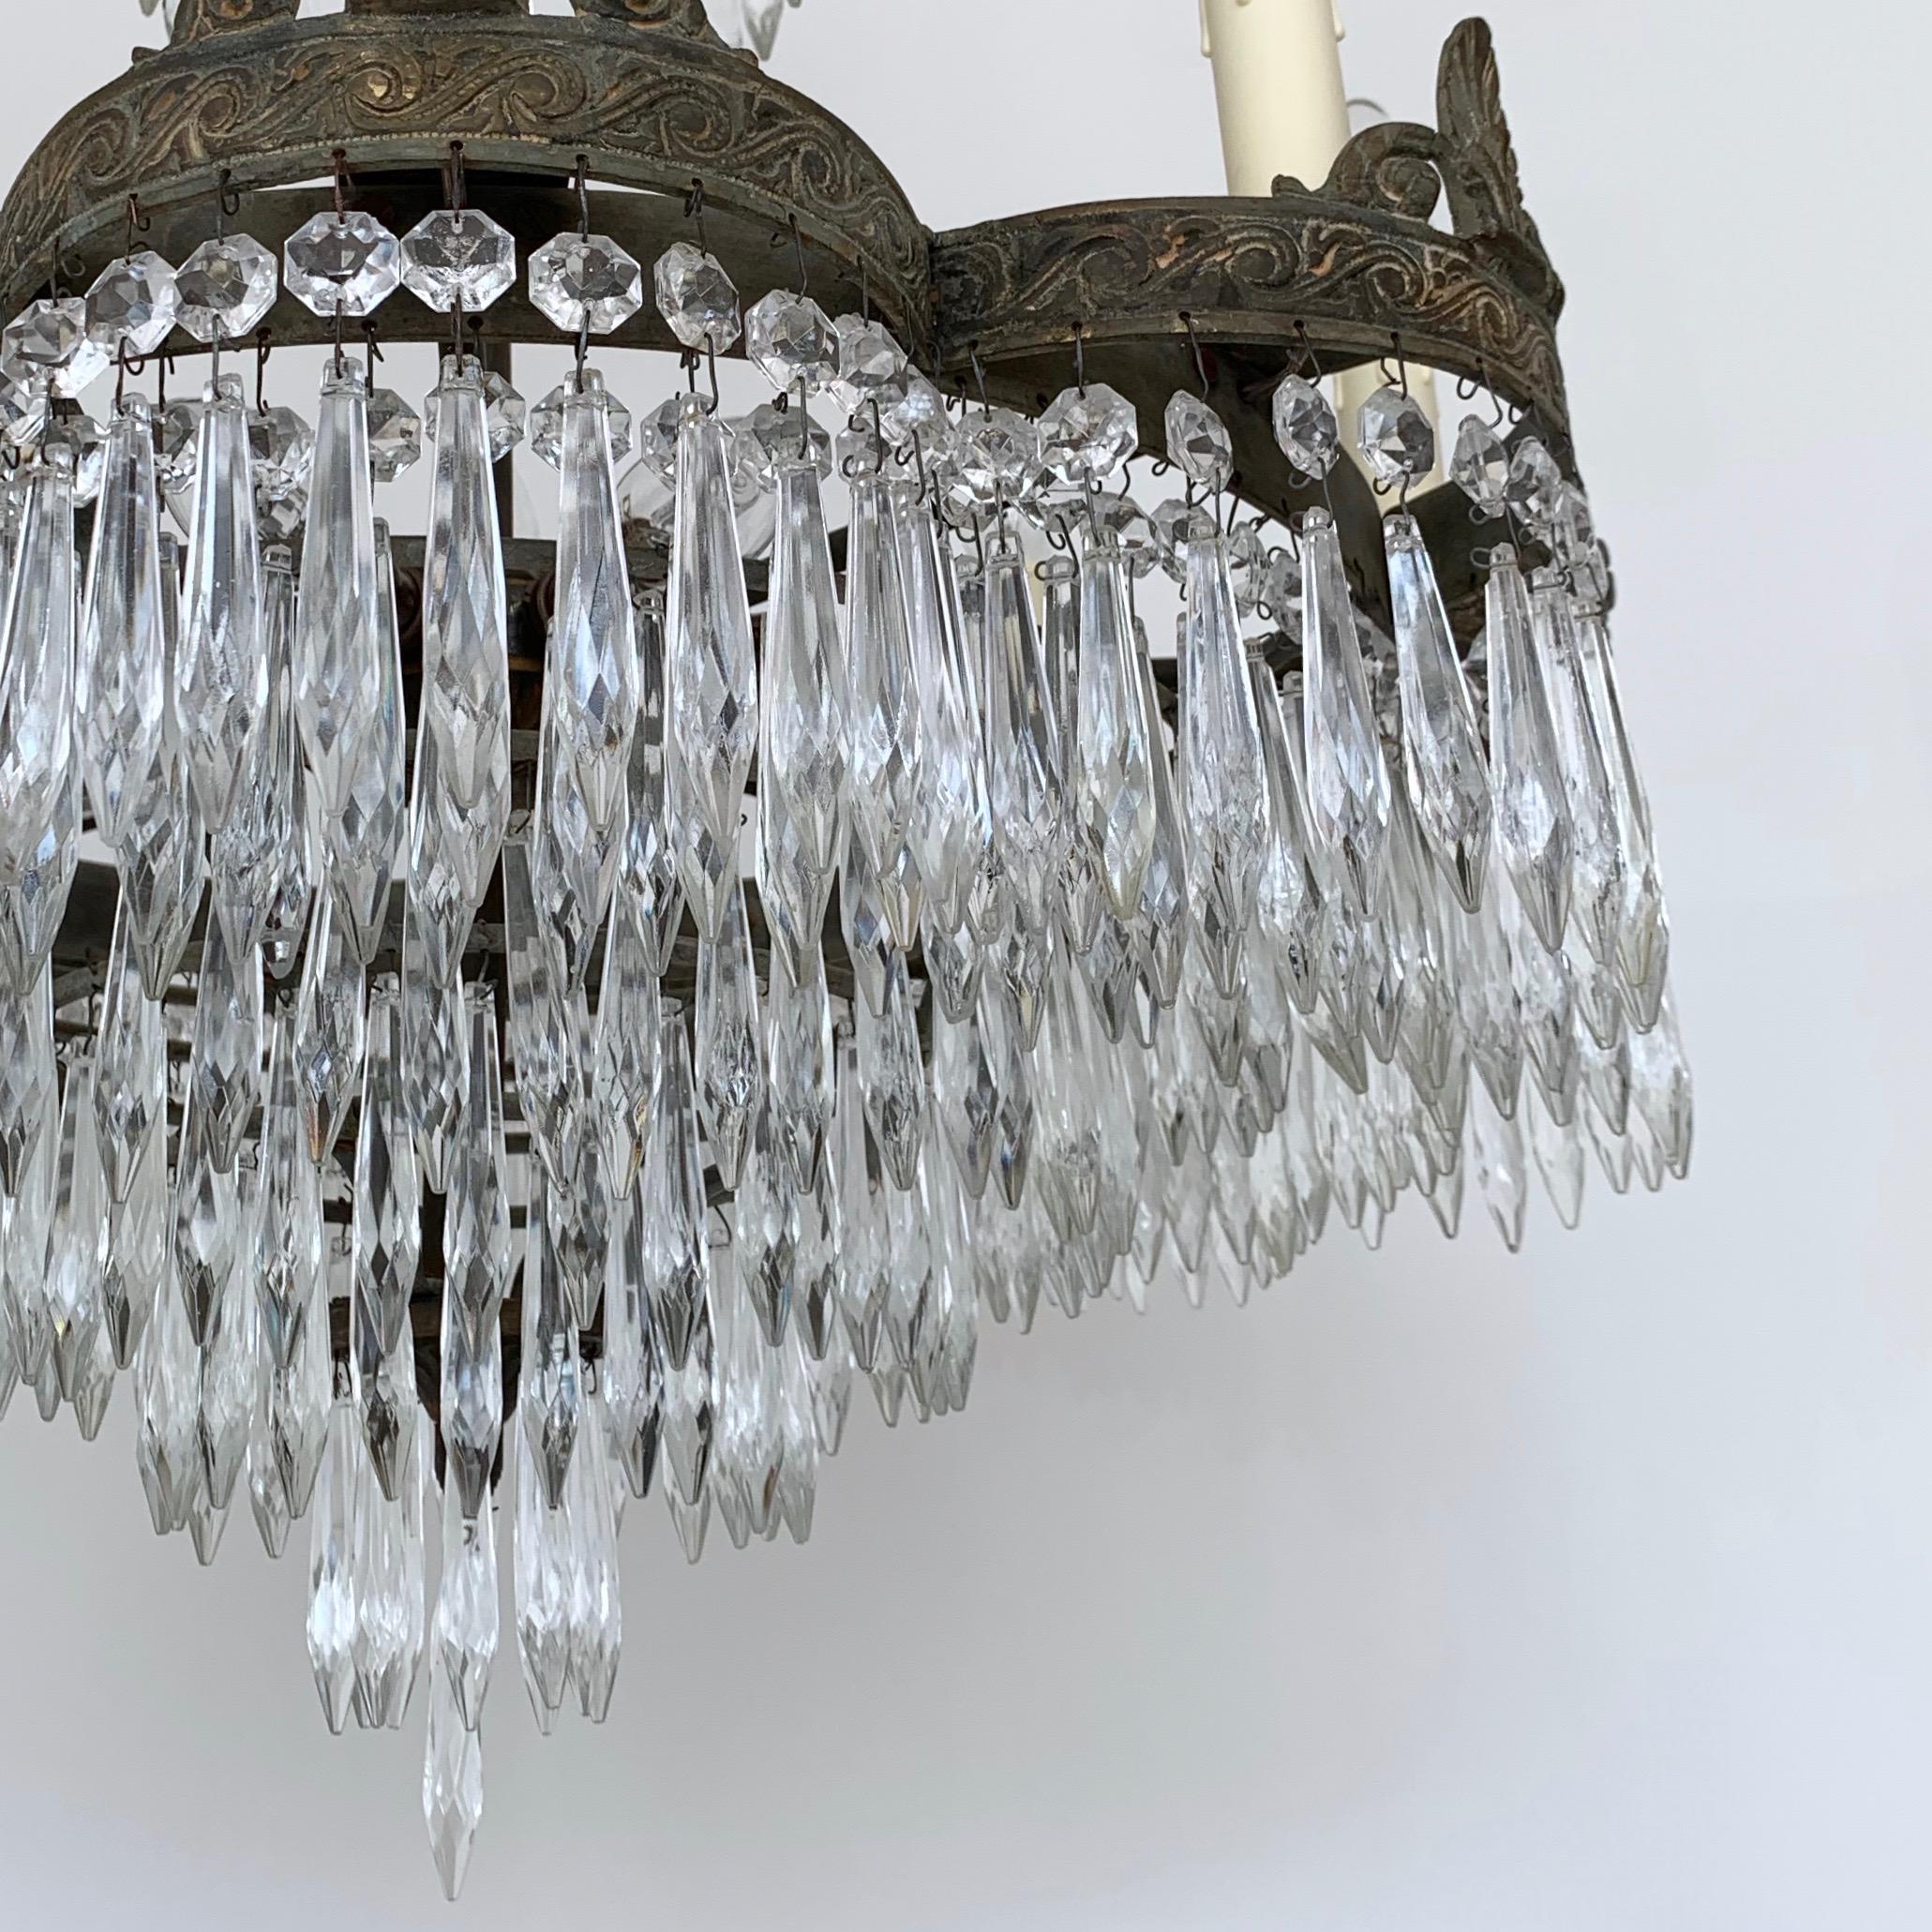 Early 1900s French Waterfall Petal Frame Chandelier with Glass Icicle Drops For Sale 5